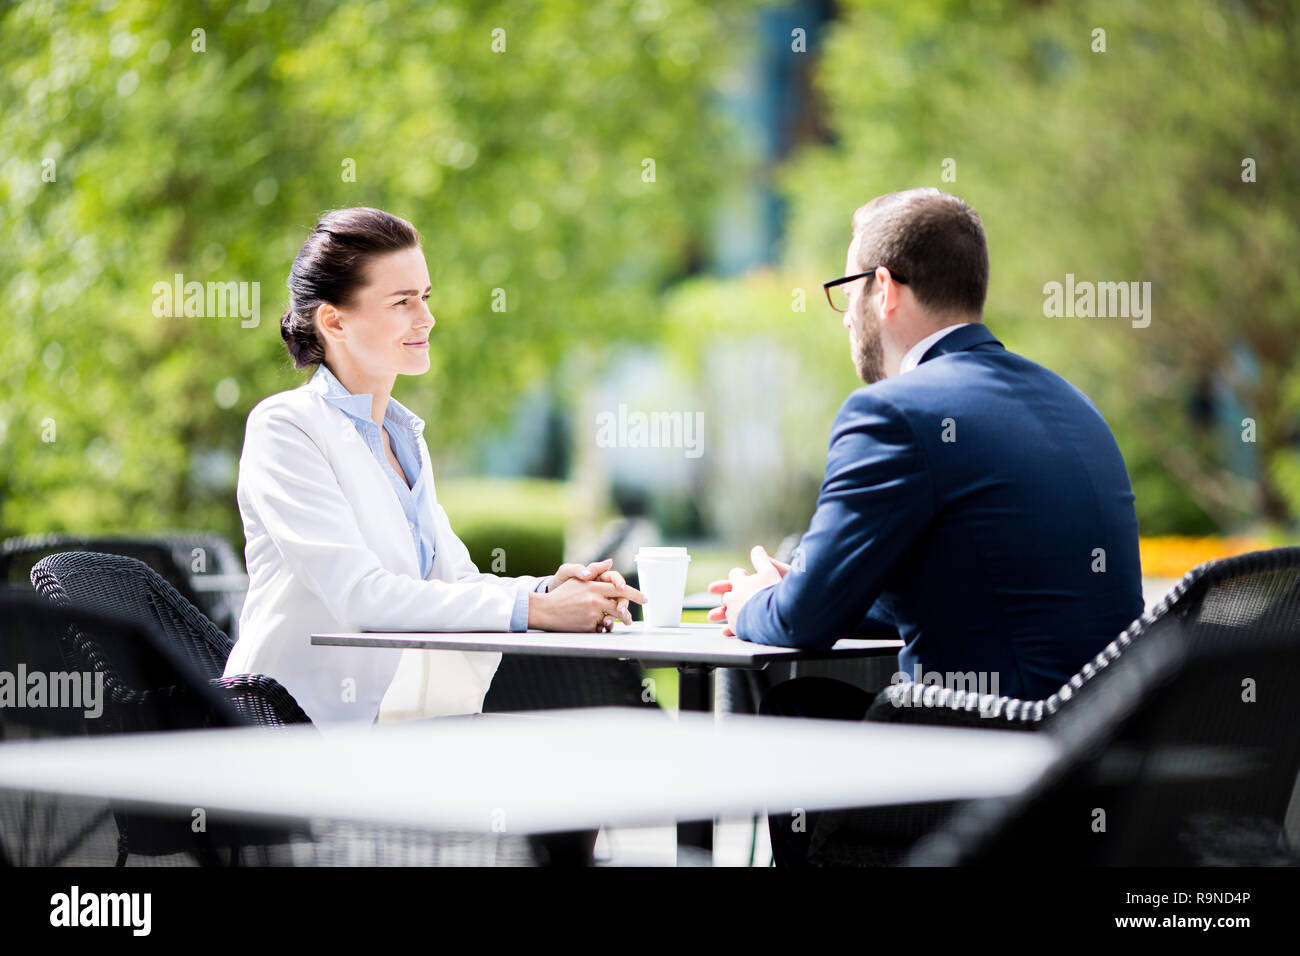 Man and woman sitting at cafe and having dialogue Stock Photo